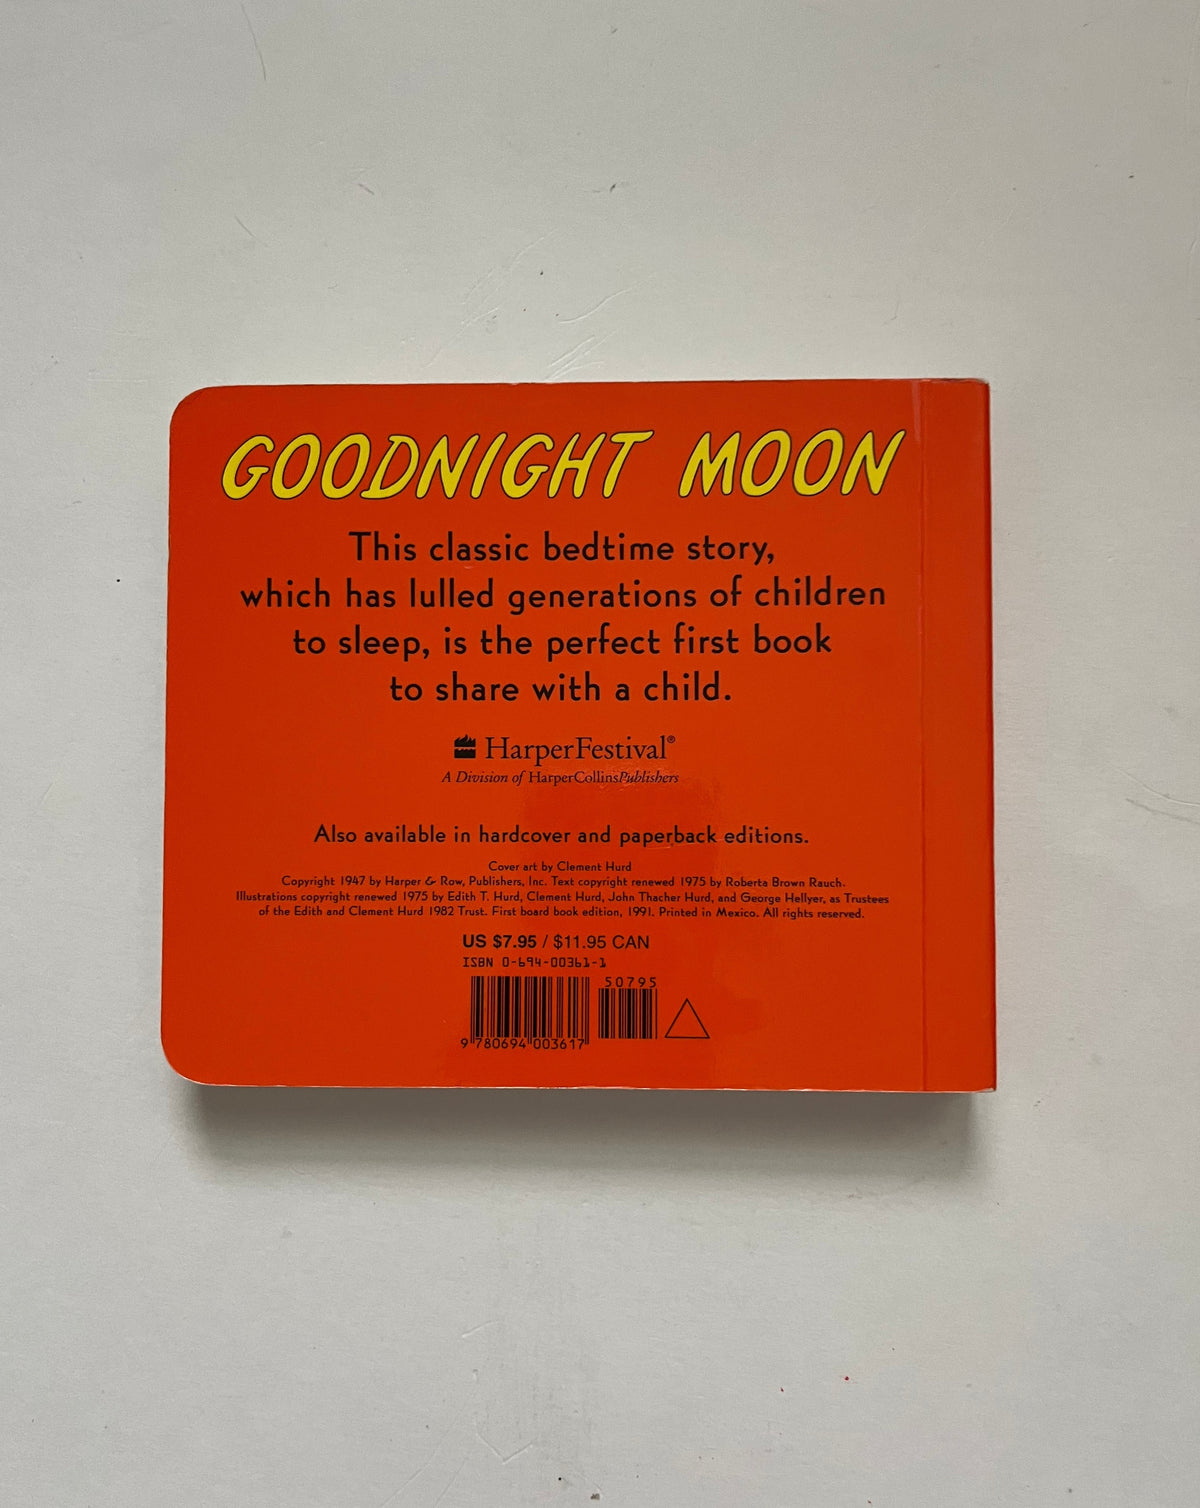 Goodnight Moon by Margaret Wise Brown and Clement Hurd